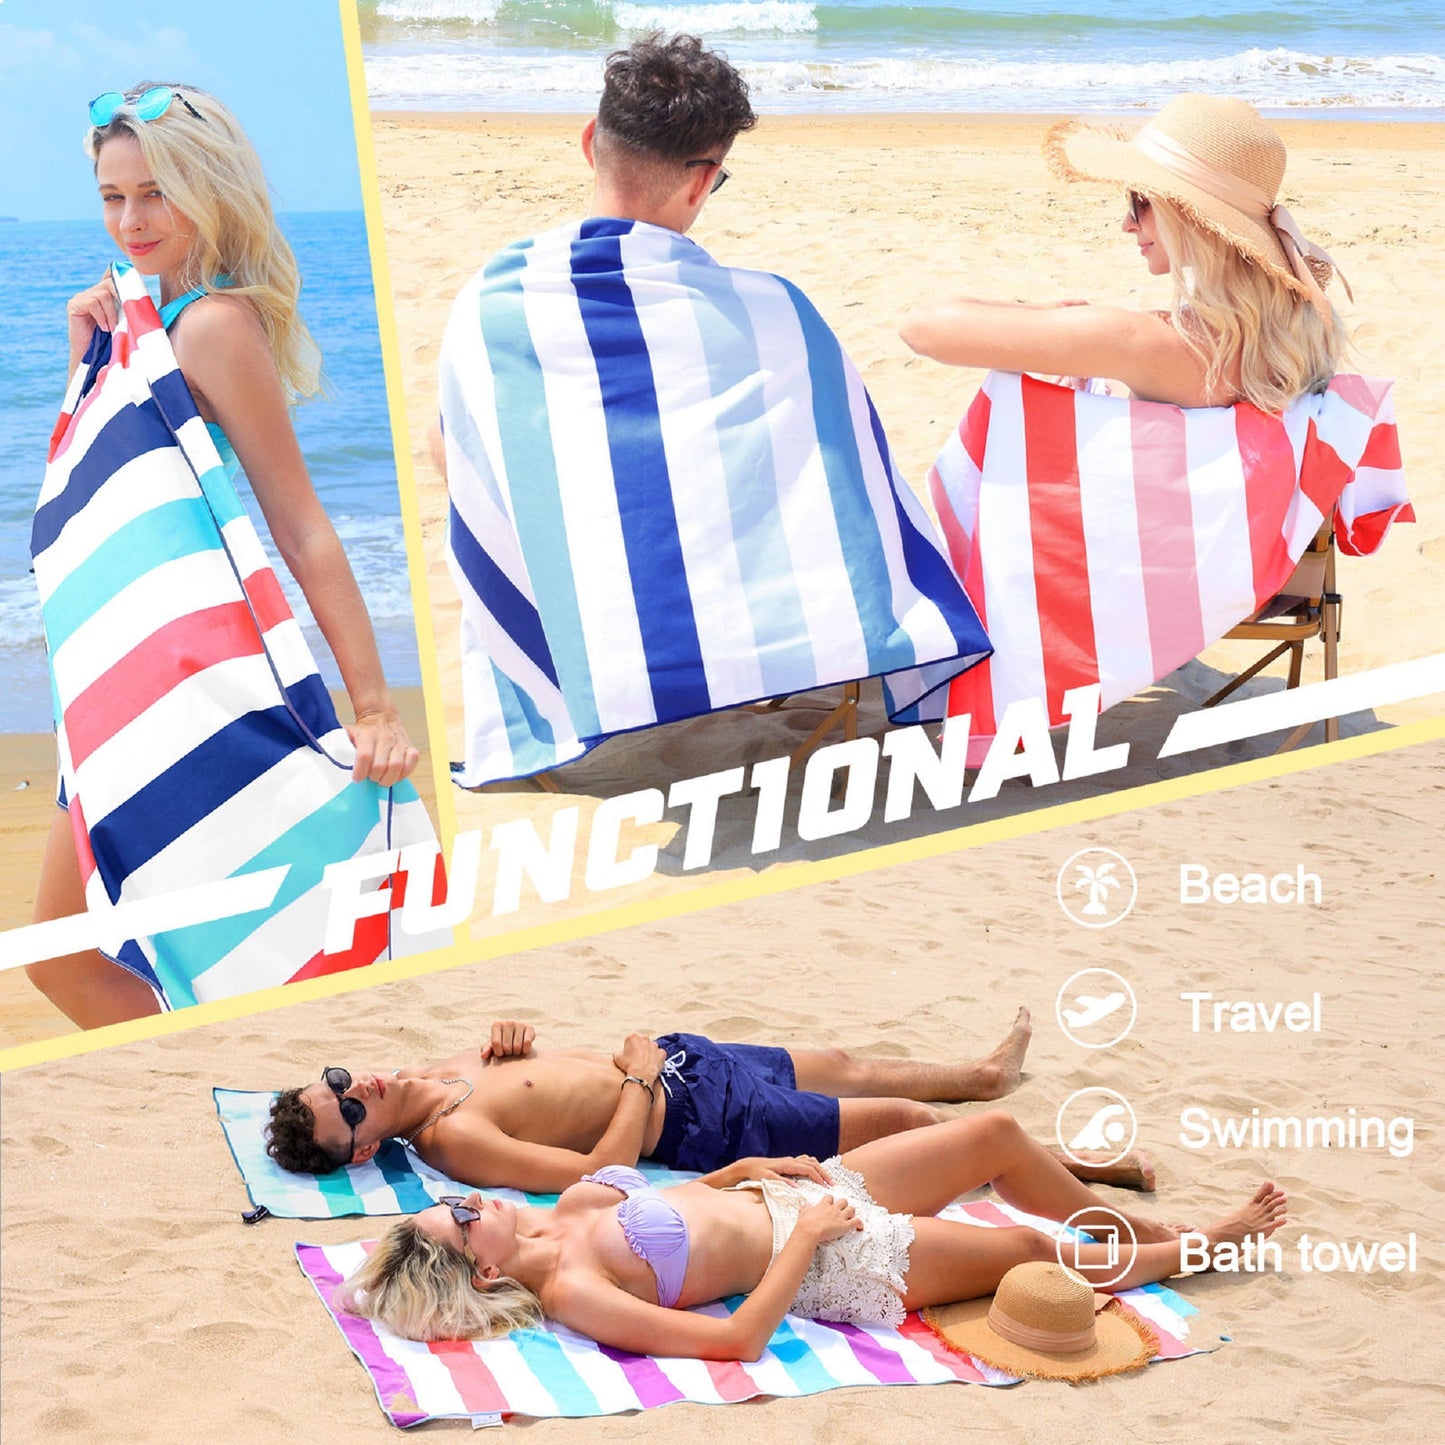 Exclusivo Mezcla Microfiber Quick Dry Beach Towel, Large Sand Free Beach Towel for Travel/Camping/Sports (Striped Multicolor, 30"X60") - Super Absorbent, Compact and Lightweight